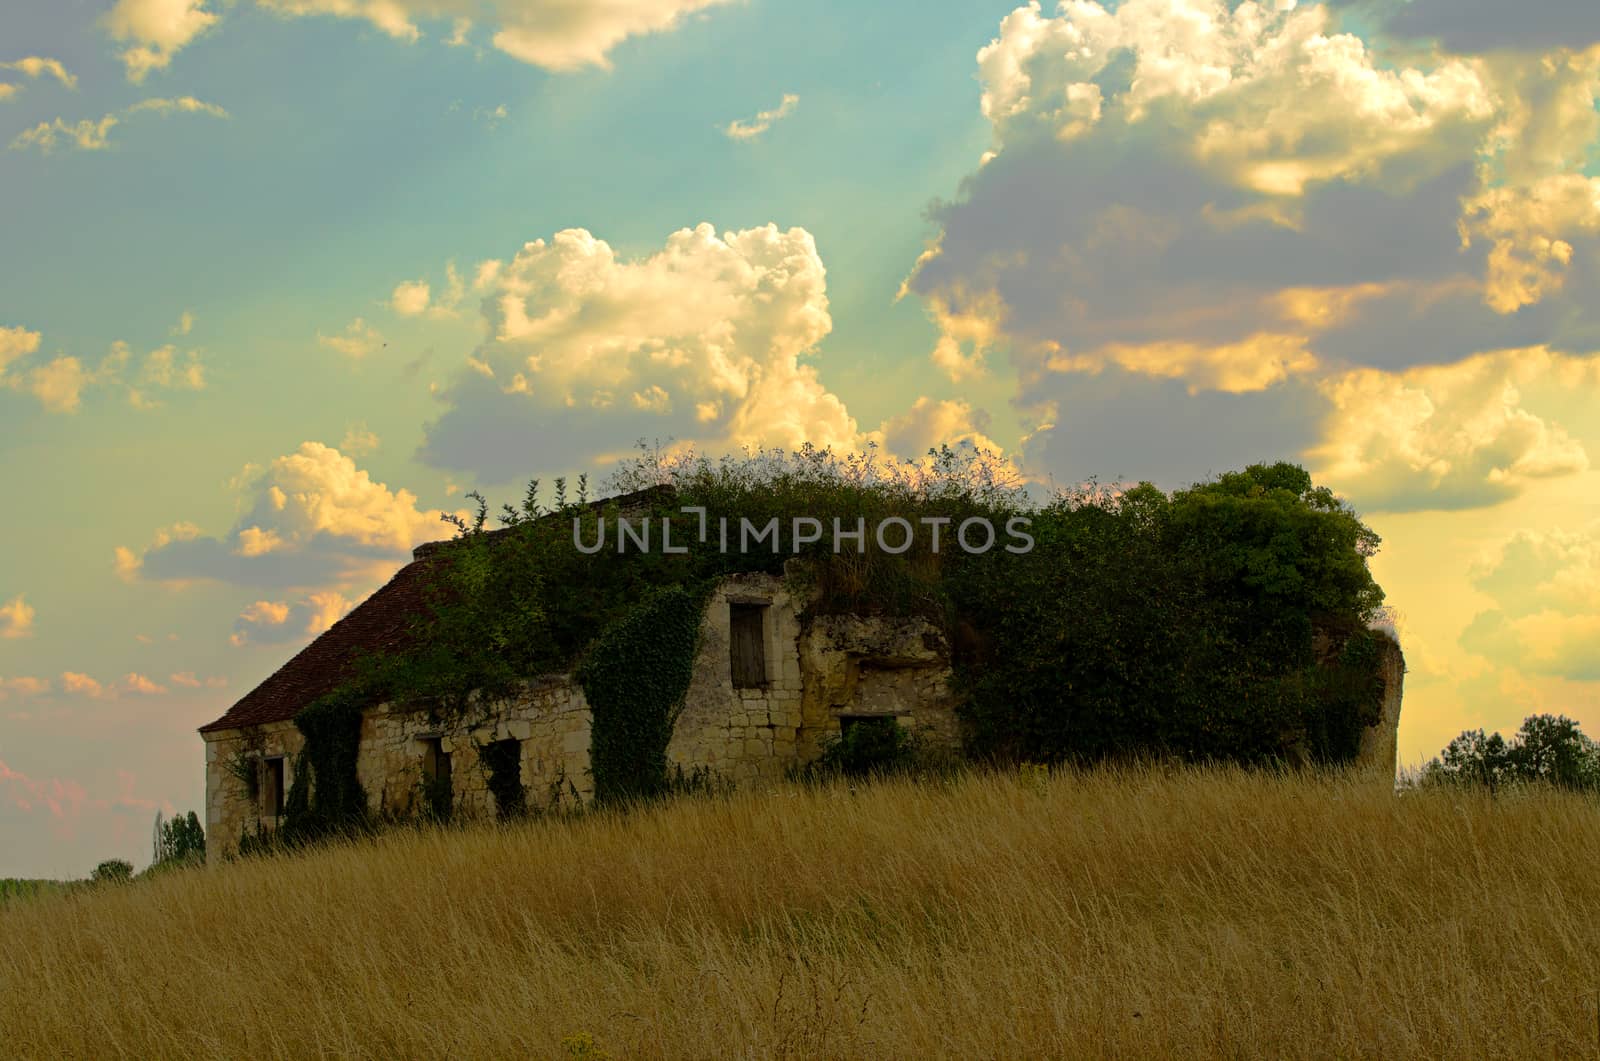 Long-abandoned farm outbuildings in France by flaneur9